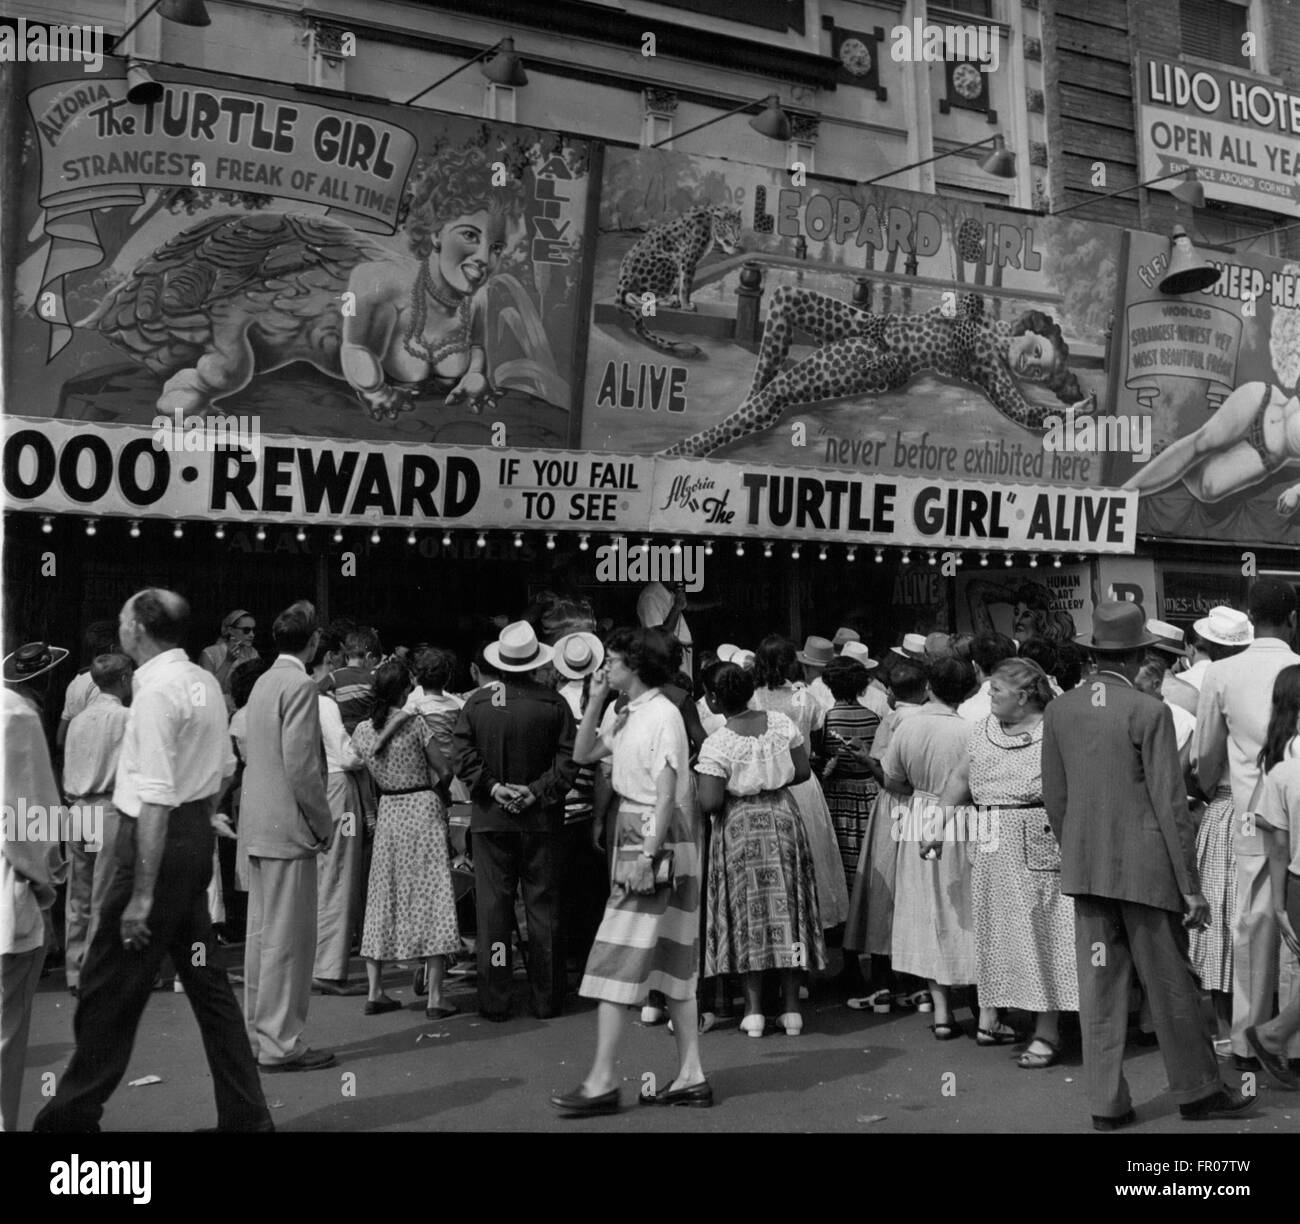 1962 - Coney Island: The freak shows get the crowds at Coney Island. The curiosity that marks us all is the key to the business and brings in the dollars. This show is featuring '' The Turtle Girl'', ''The Leopard Girl'' and the ''Sheep headed girl''. A thousand dollar reward is offered if they are not alive. Just try and collect it! © Keystone Pictures USA/ZUMAPRESS.com/Alamy Live News Stock Photo